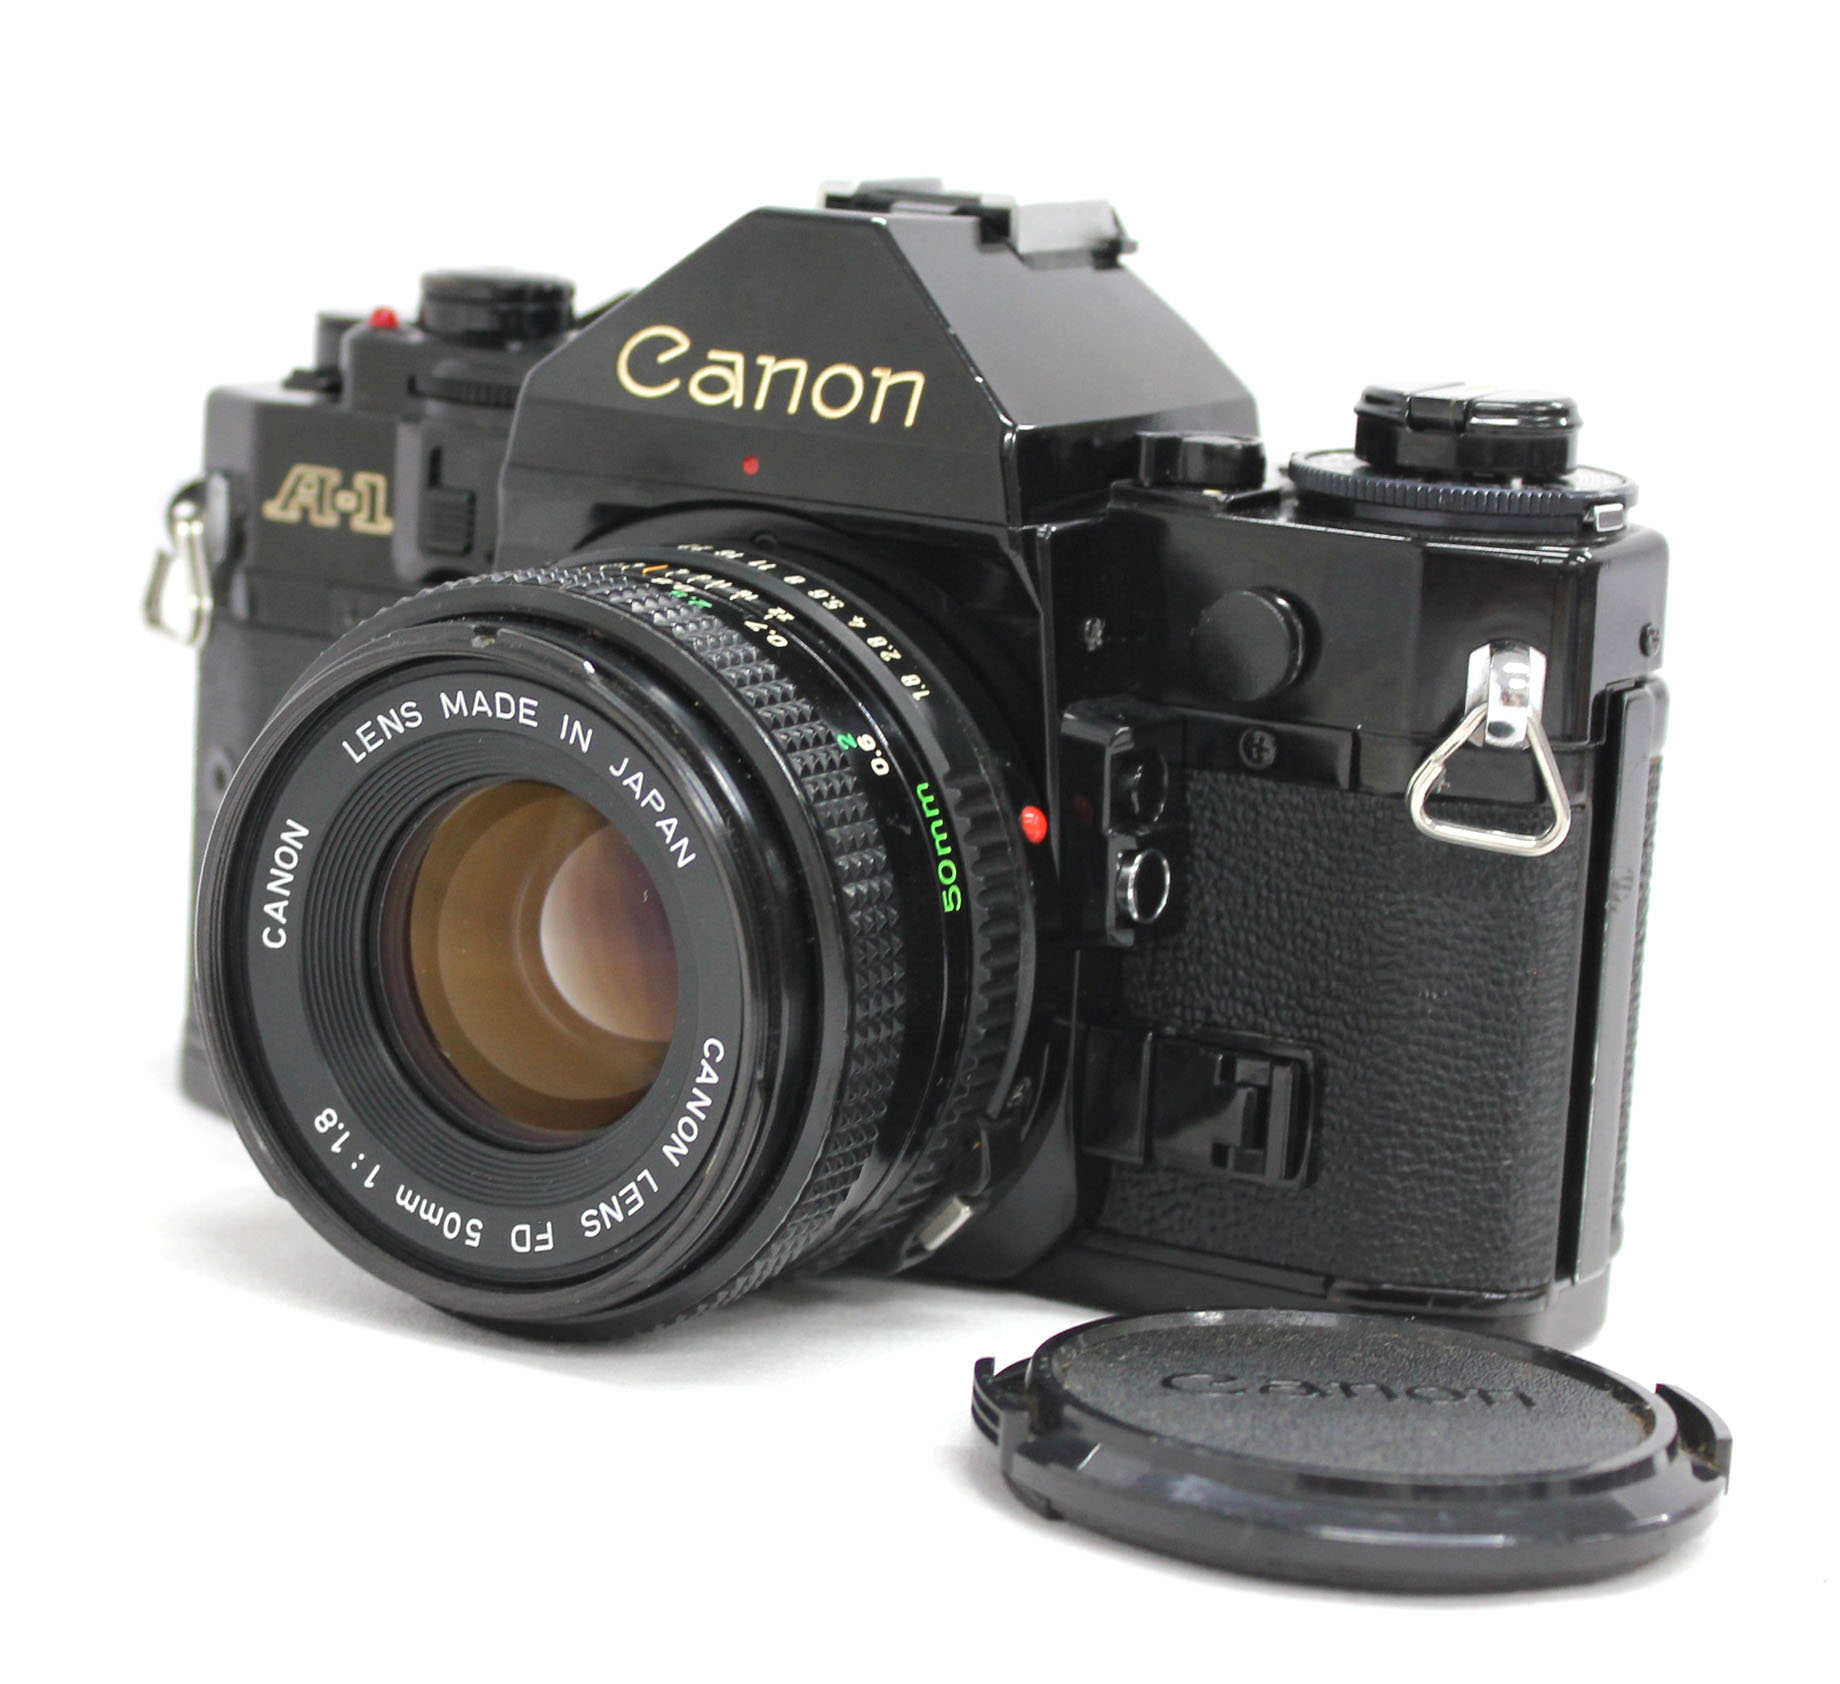 Japan Used Camera Shop | [Excellent++++] Canon A-1 35mm SLR Black with New FD 50mm F1.8 Lens from Japan